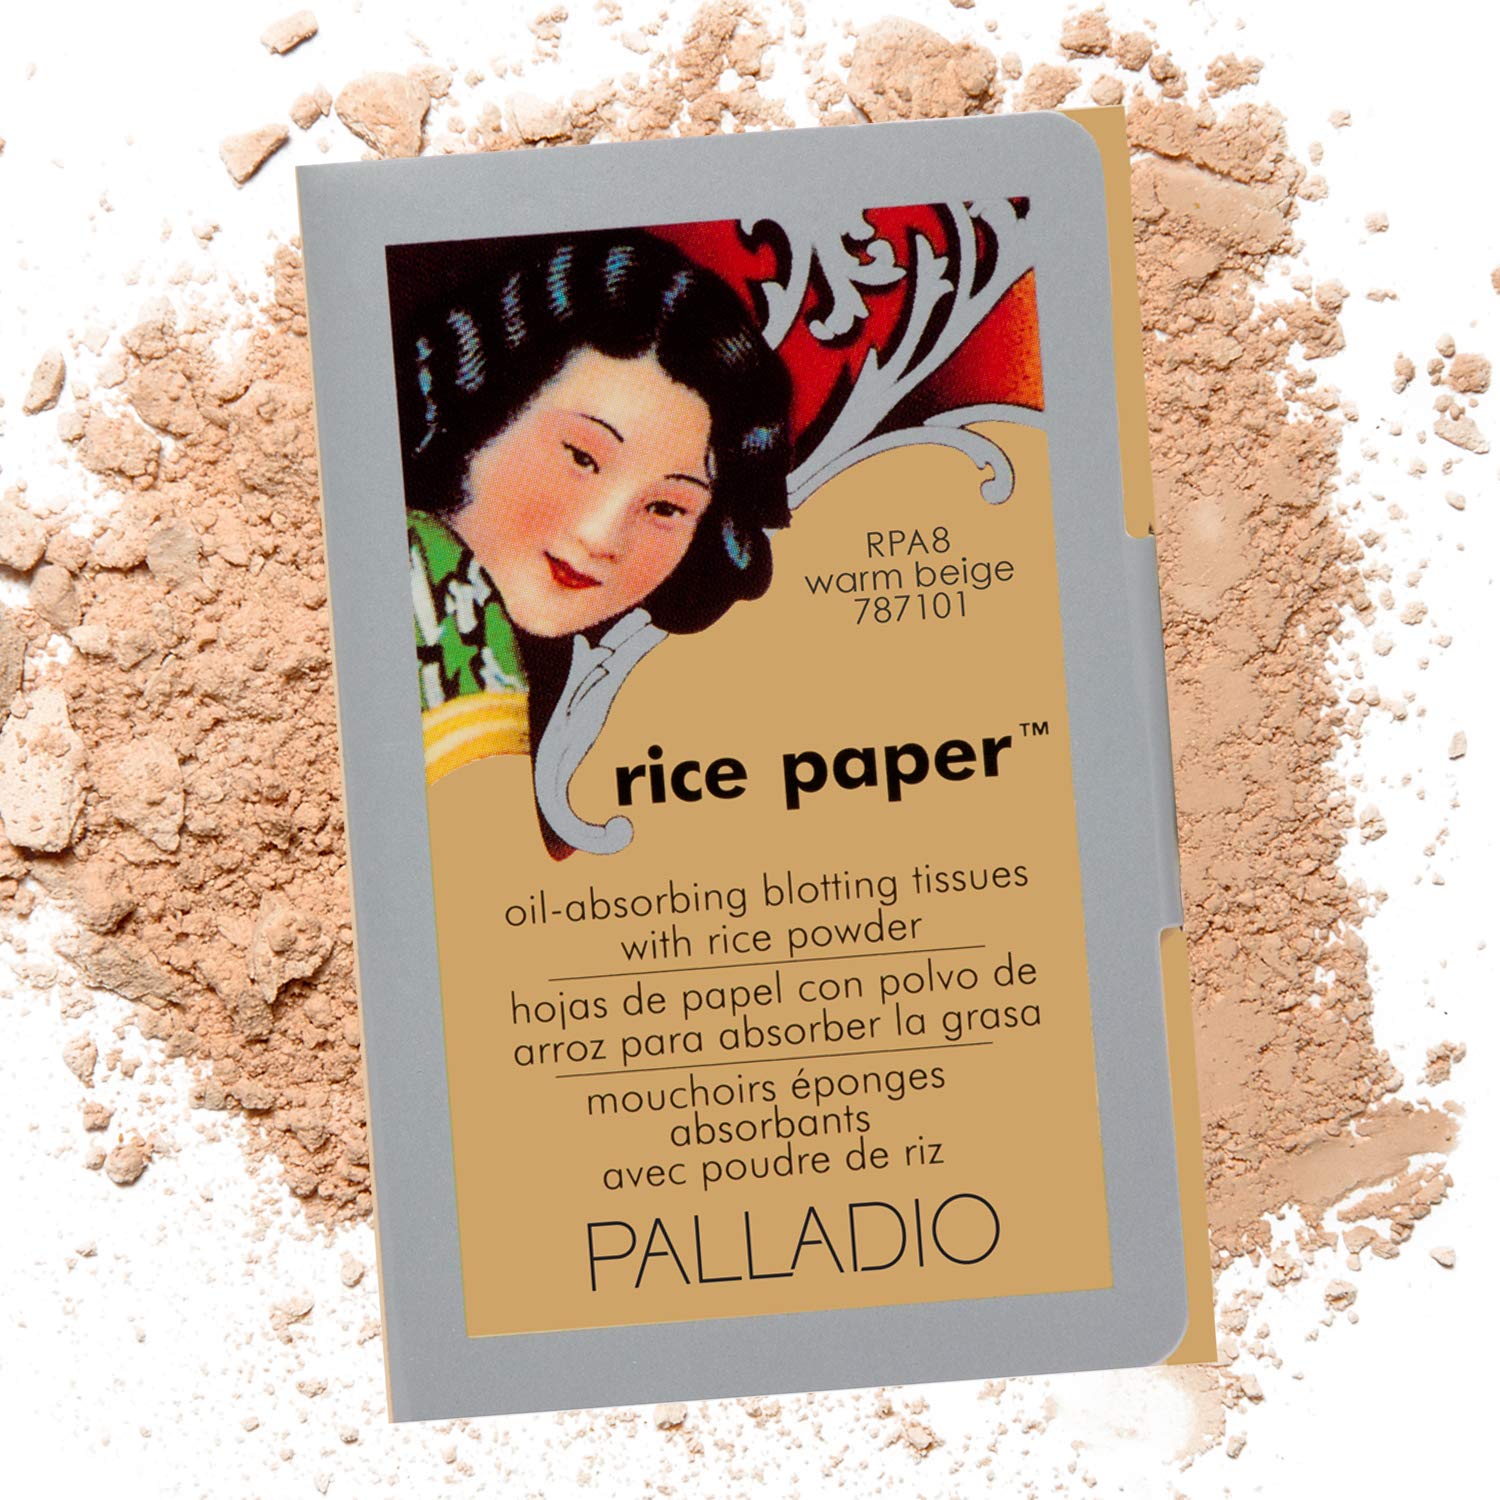 Palladio Rice Paper Facial Tissues for Oily Skin